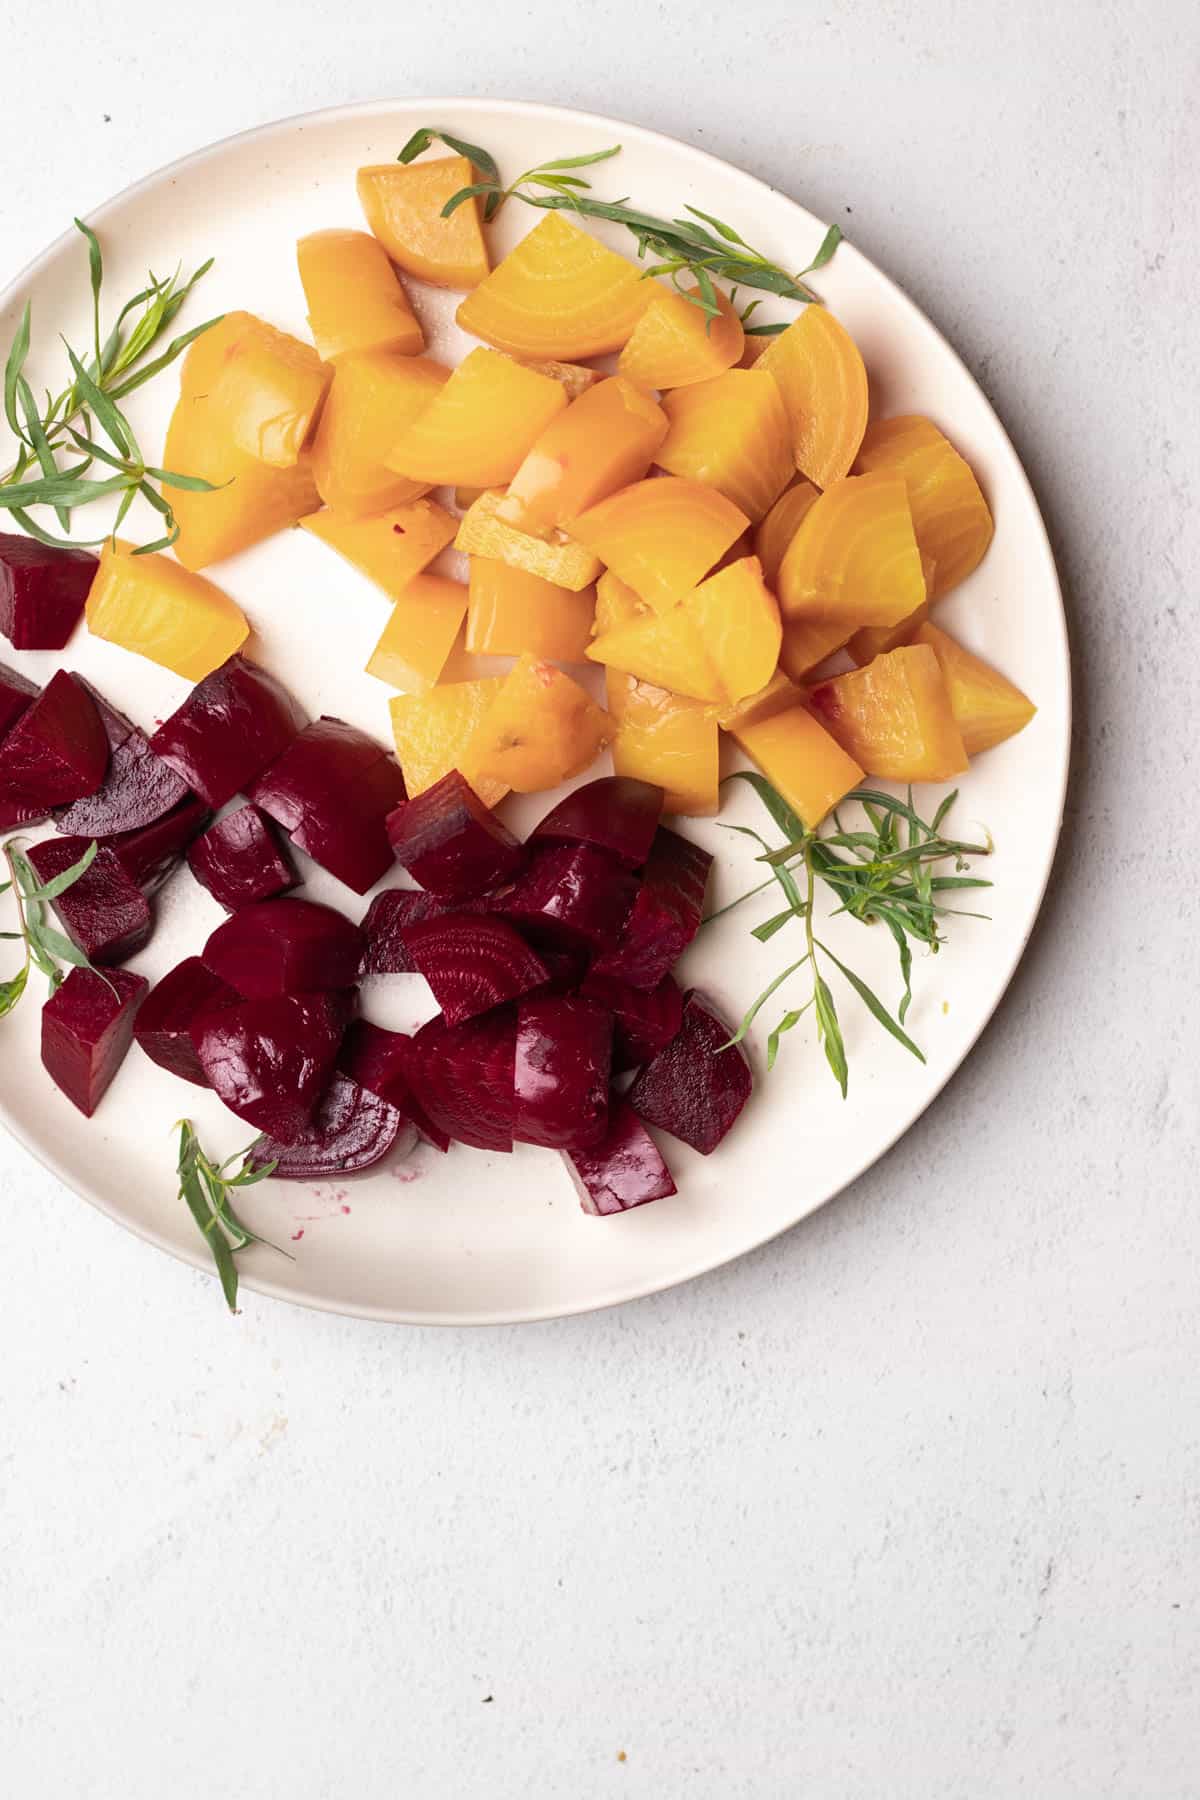 Large diced yellow and red beets on a large round plate.